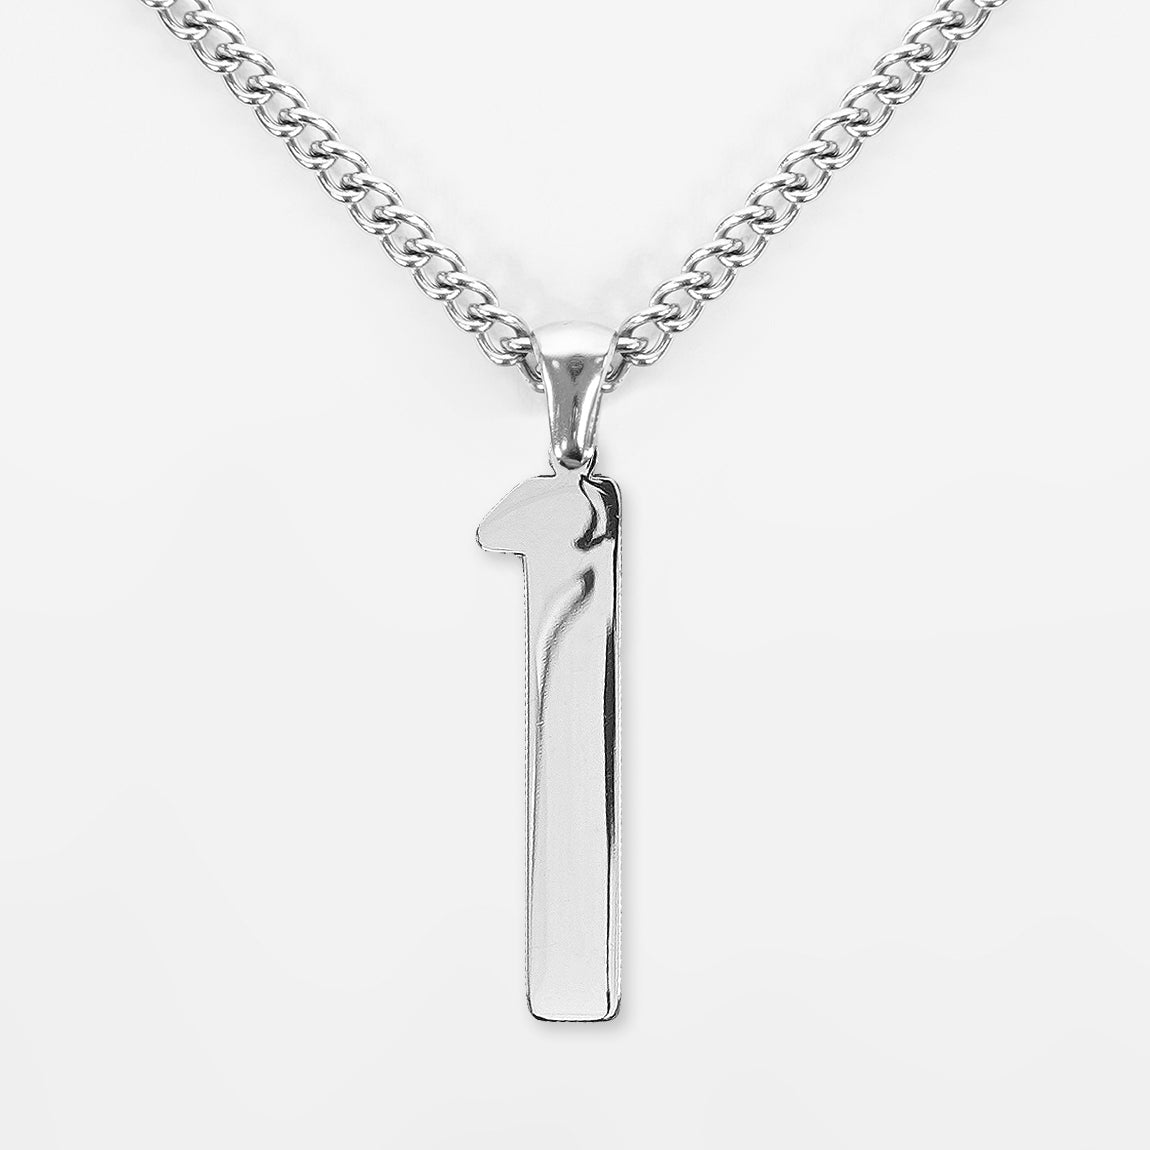 1 Number Pendant with Chain Kids Necklace - Stainless Steel